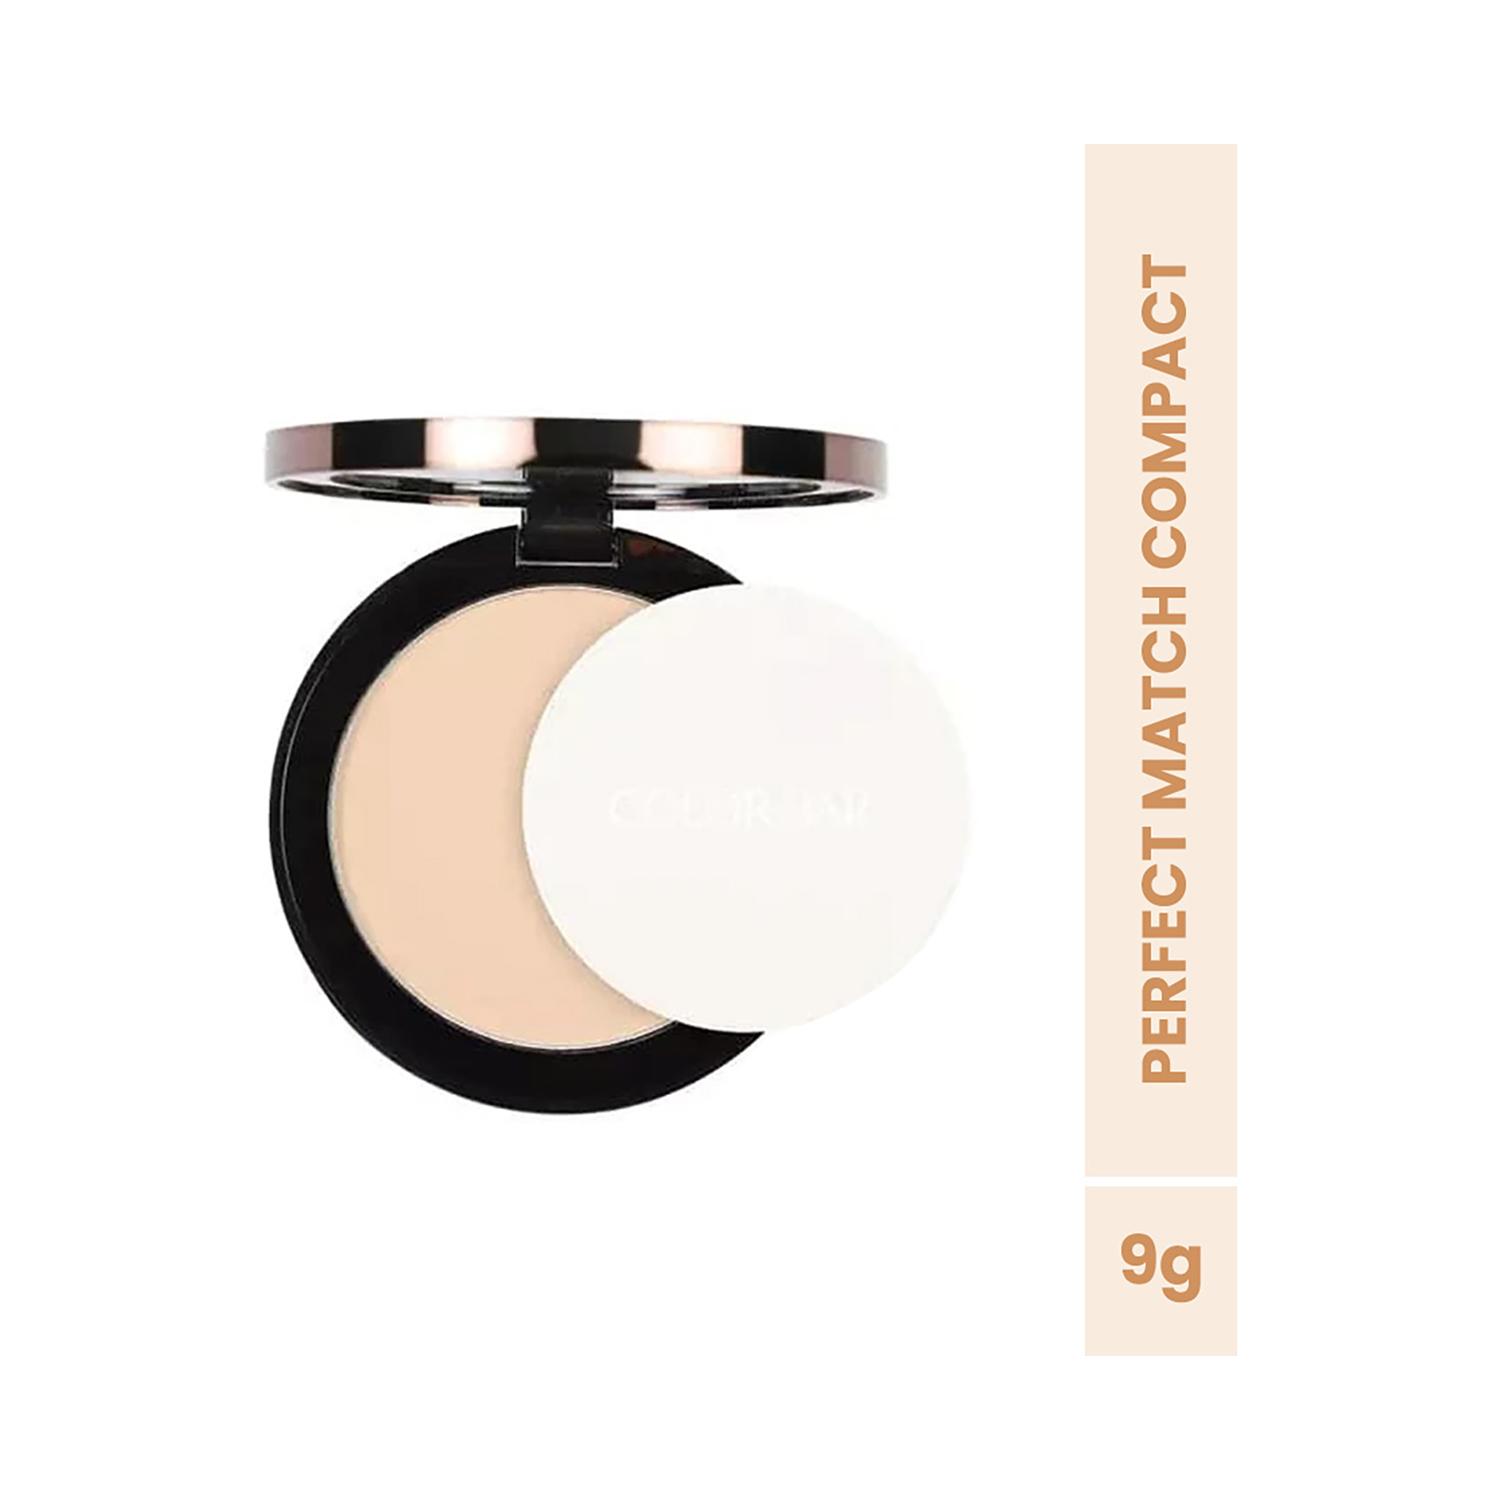 Colorbar | Colorbar Perfect Match Compact - 001 Classic Ivory (9g)